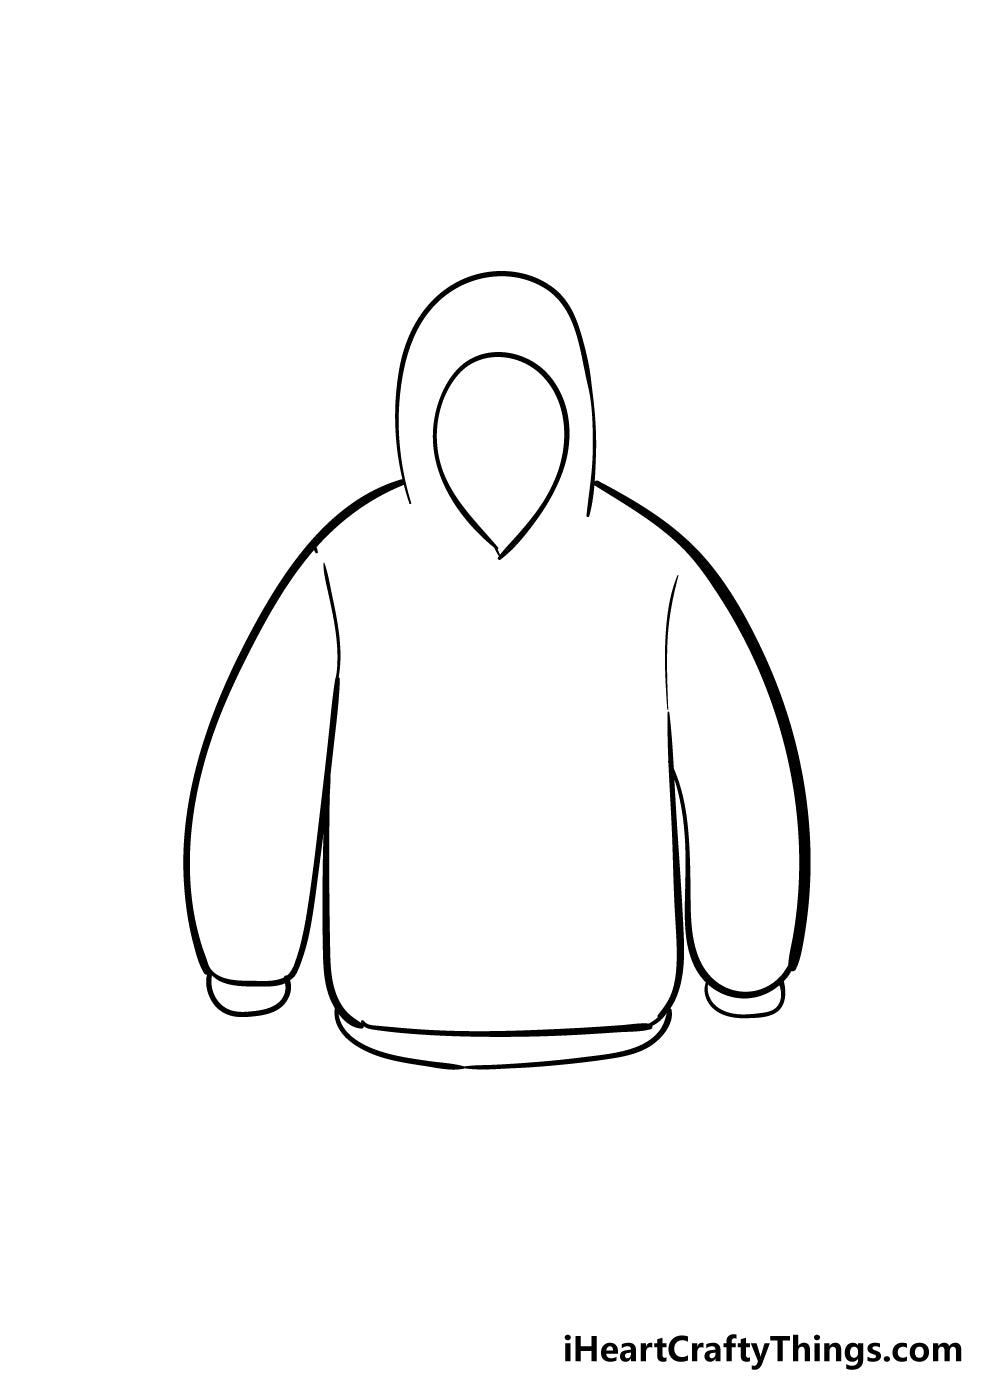 How To Draw A Hoodie?